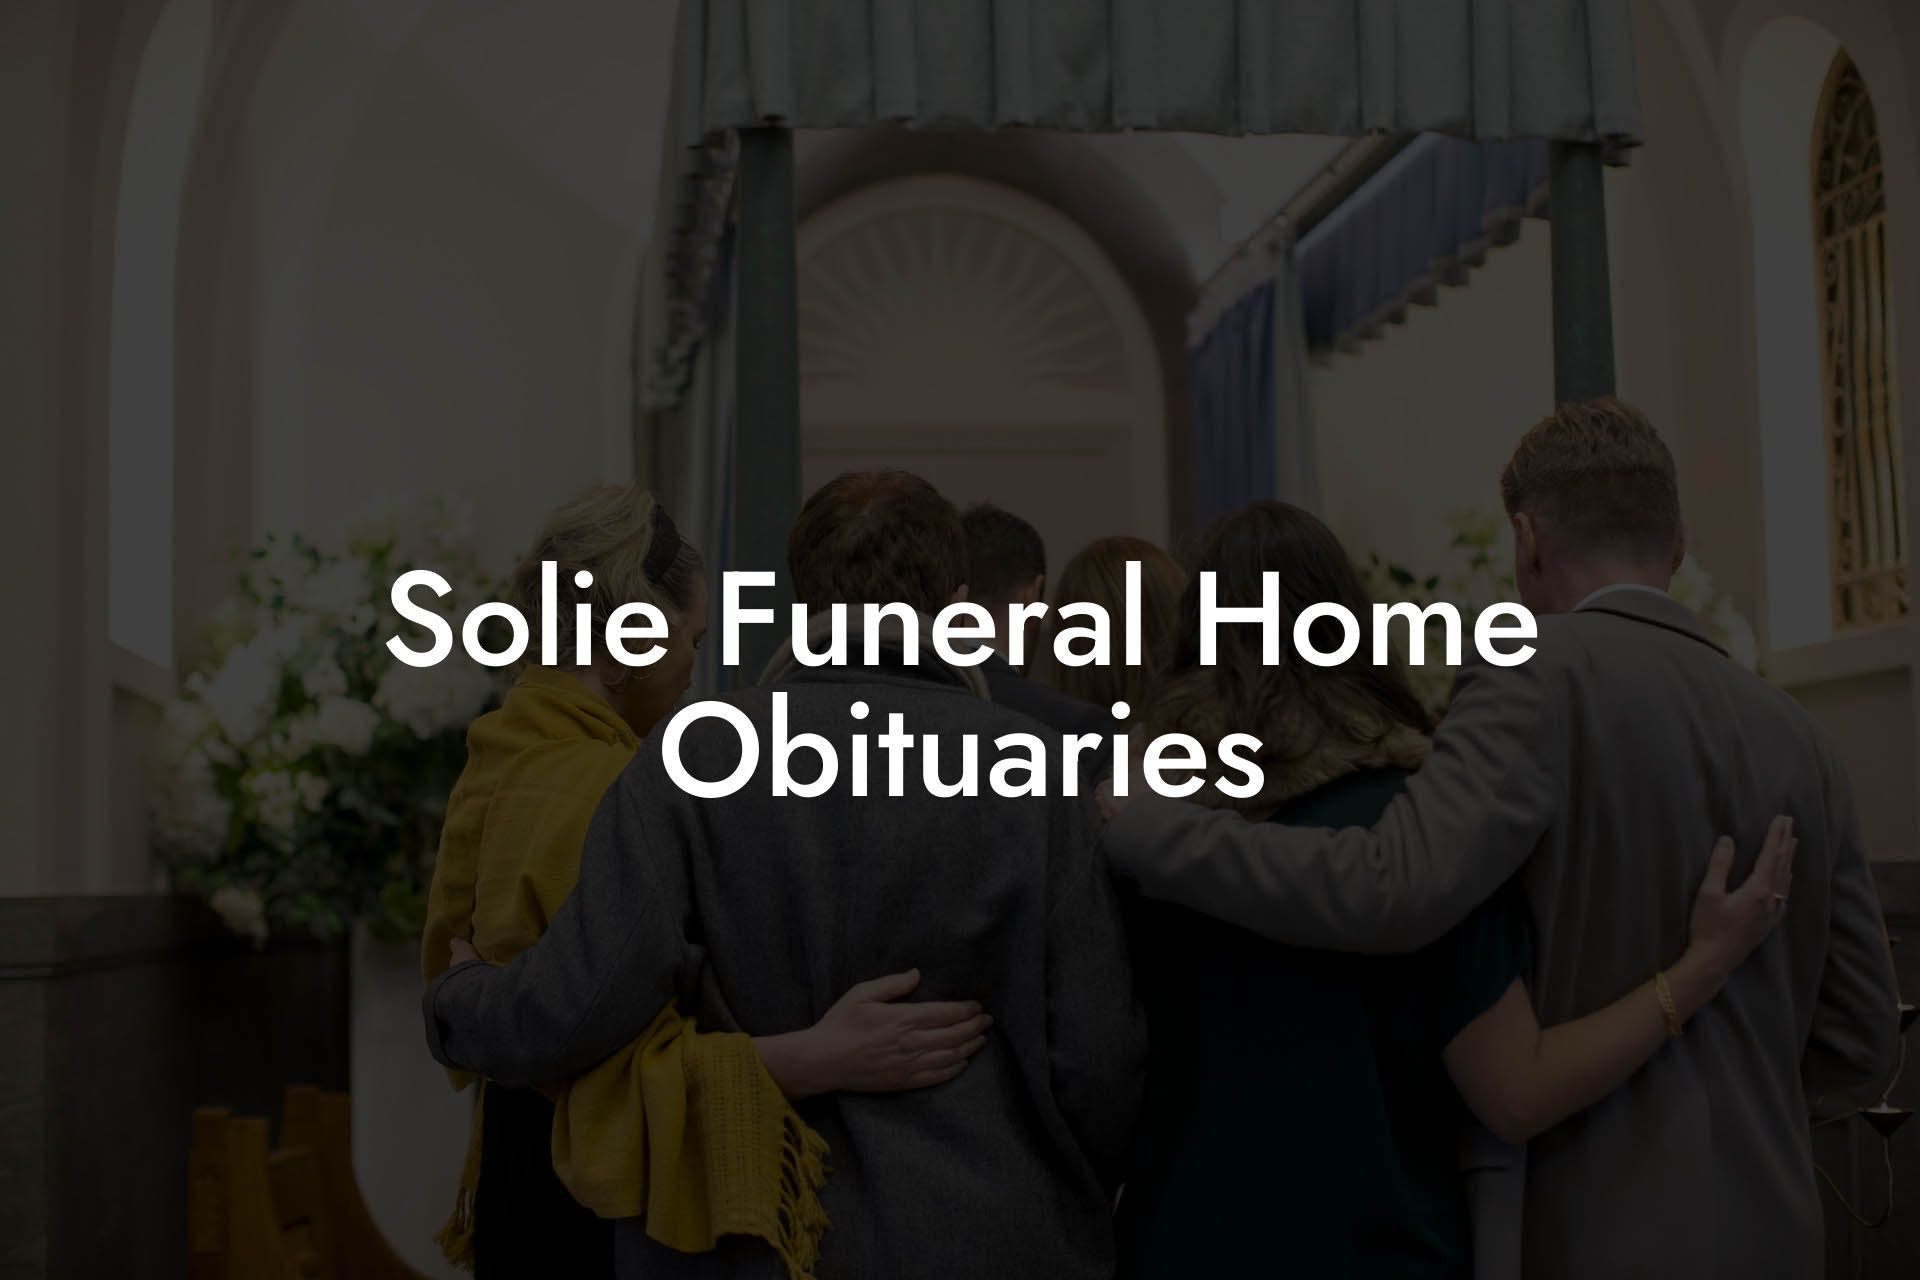 Solie Funeral Home Obituaries